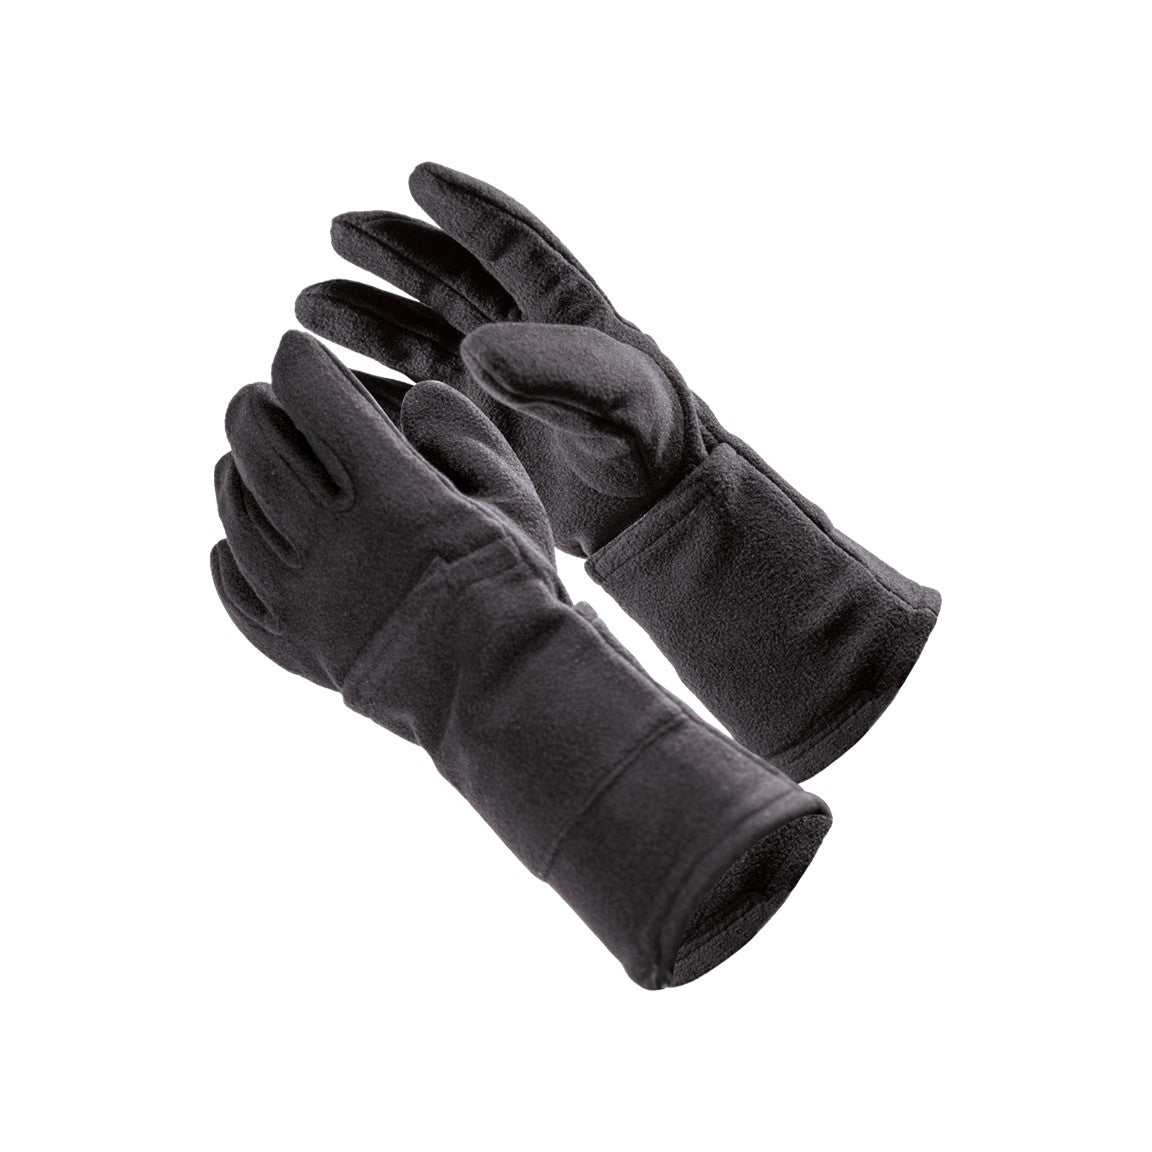 HXT Microwavable Heated Mittens - Black